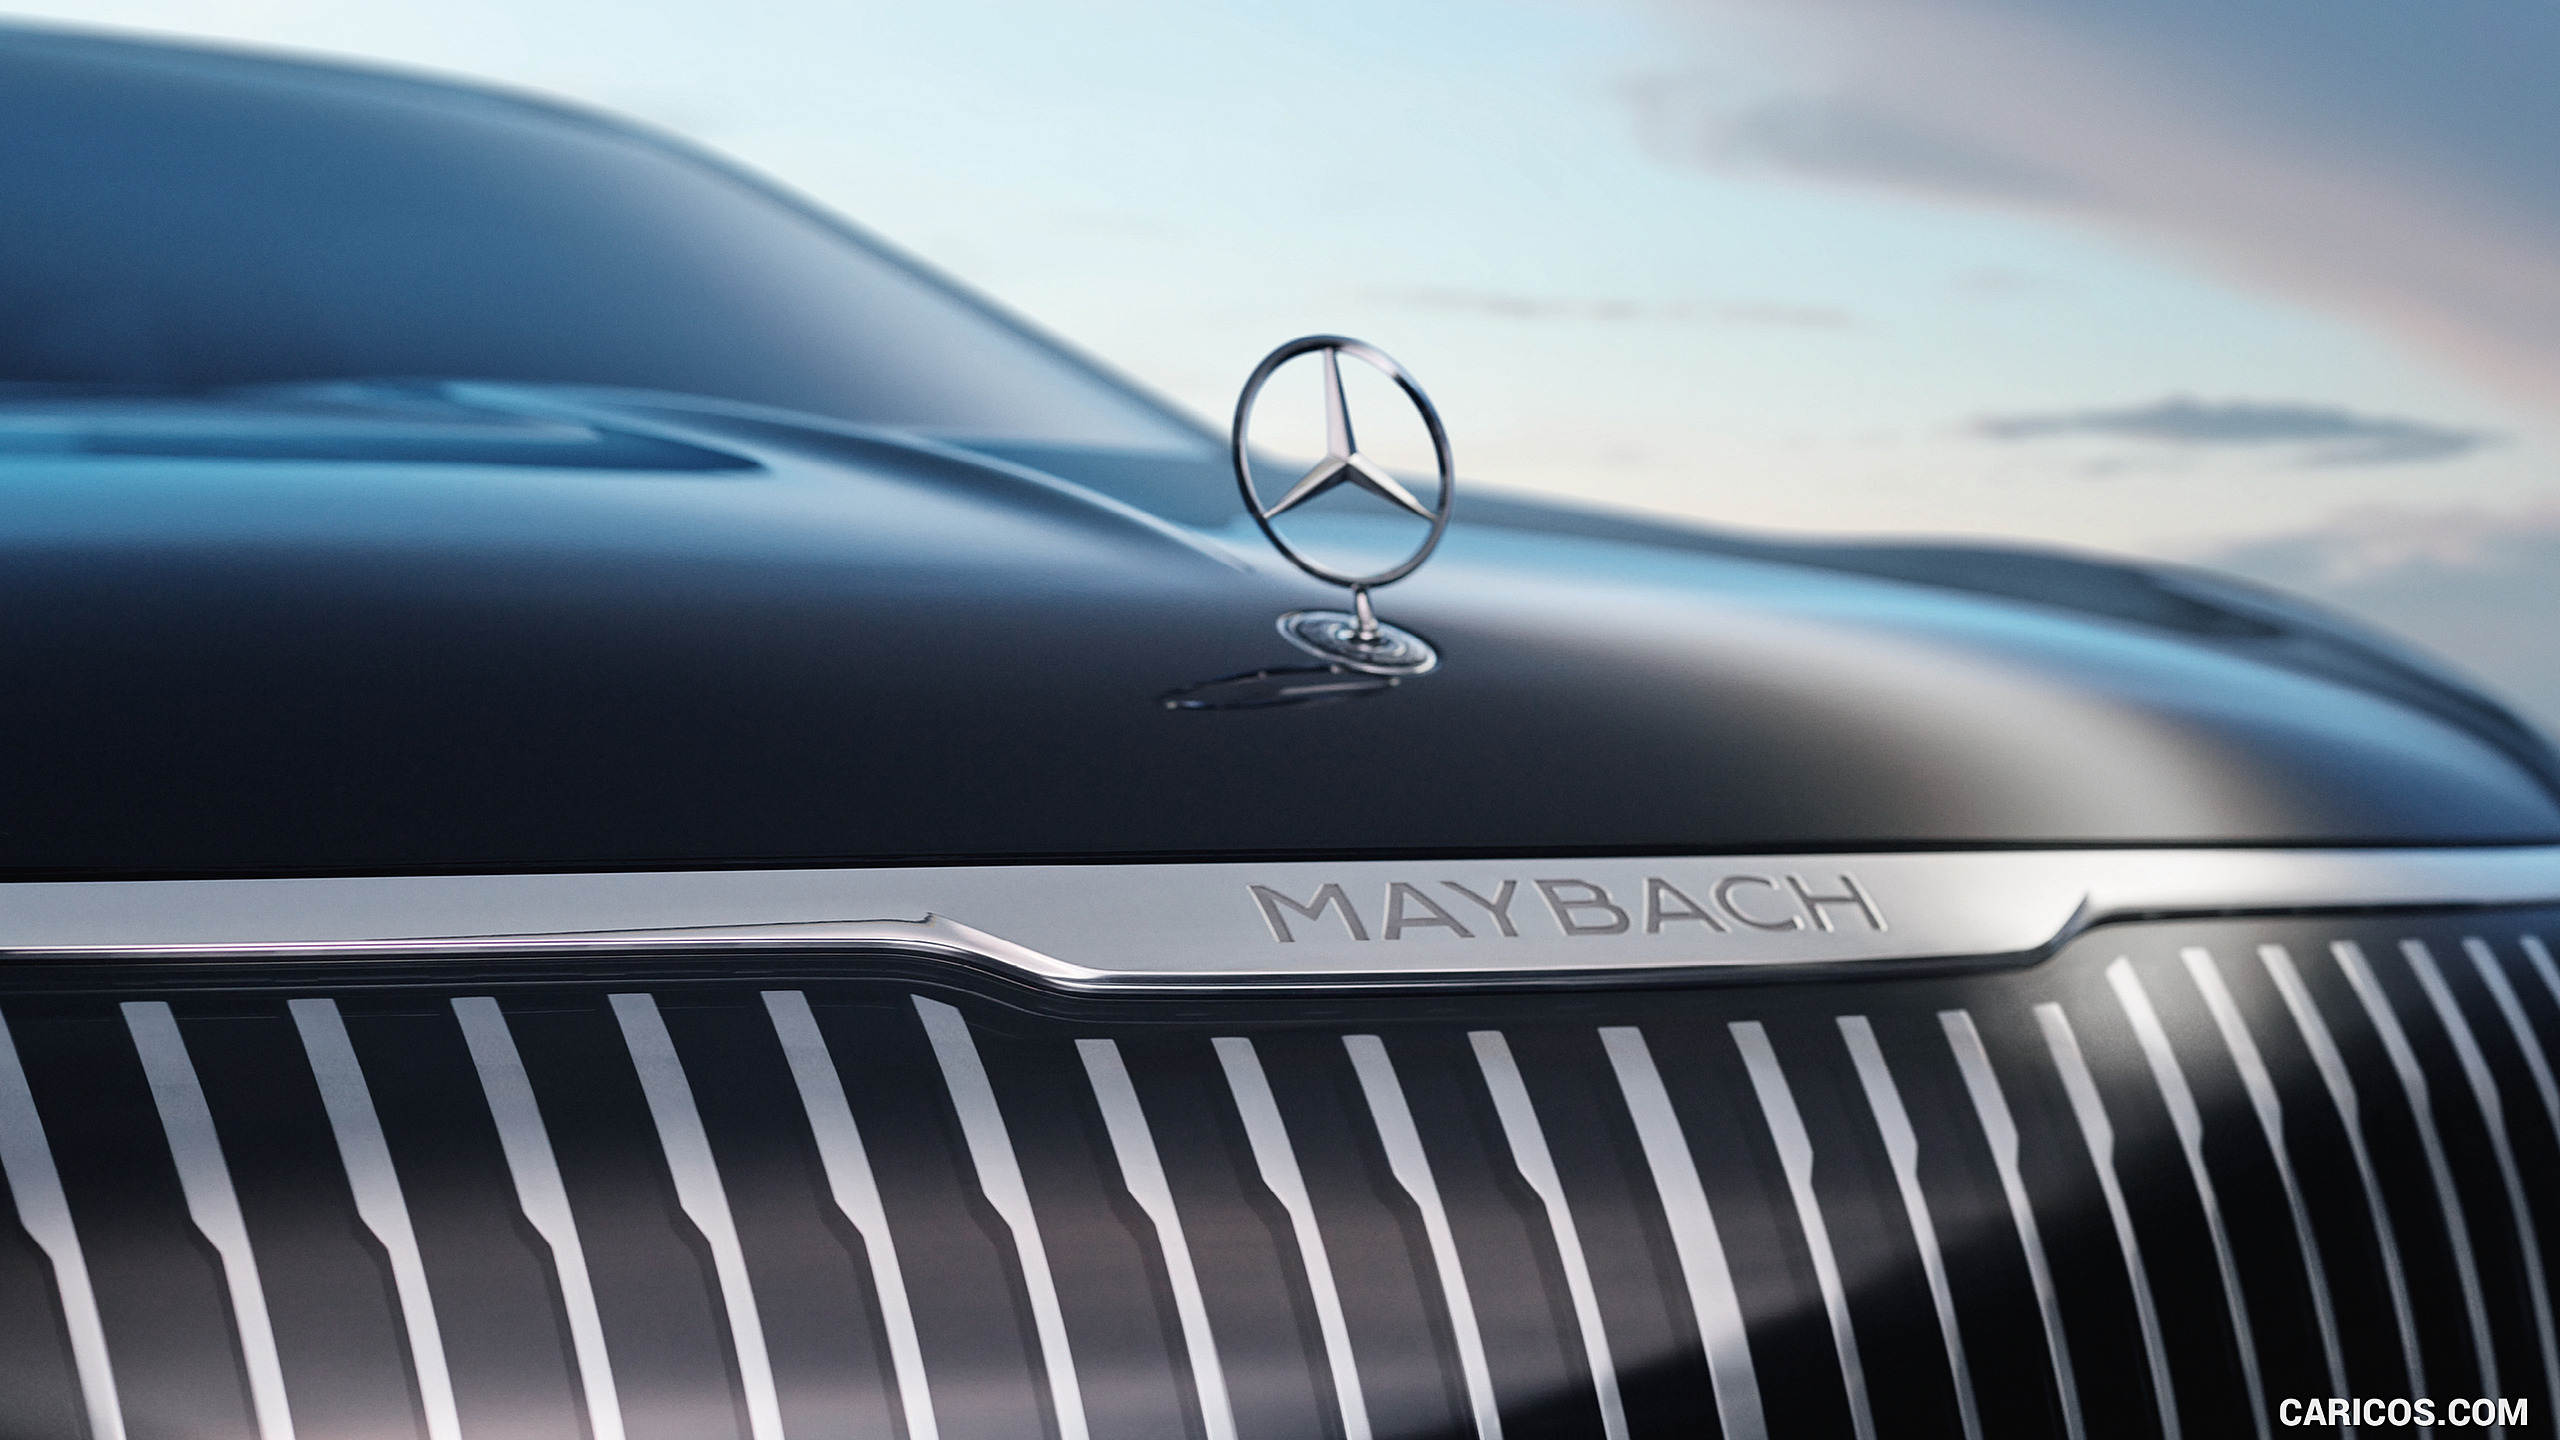 2021 Mercedes-Maybach EQS Concept - Detail, #11 of 29